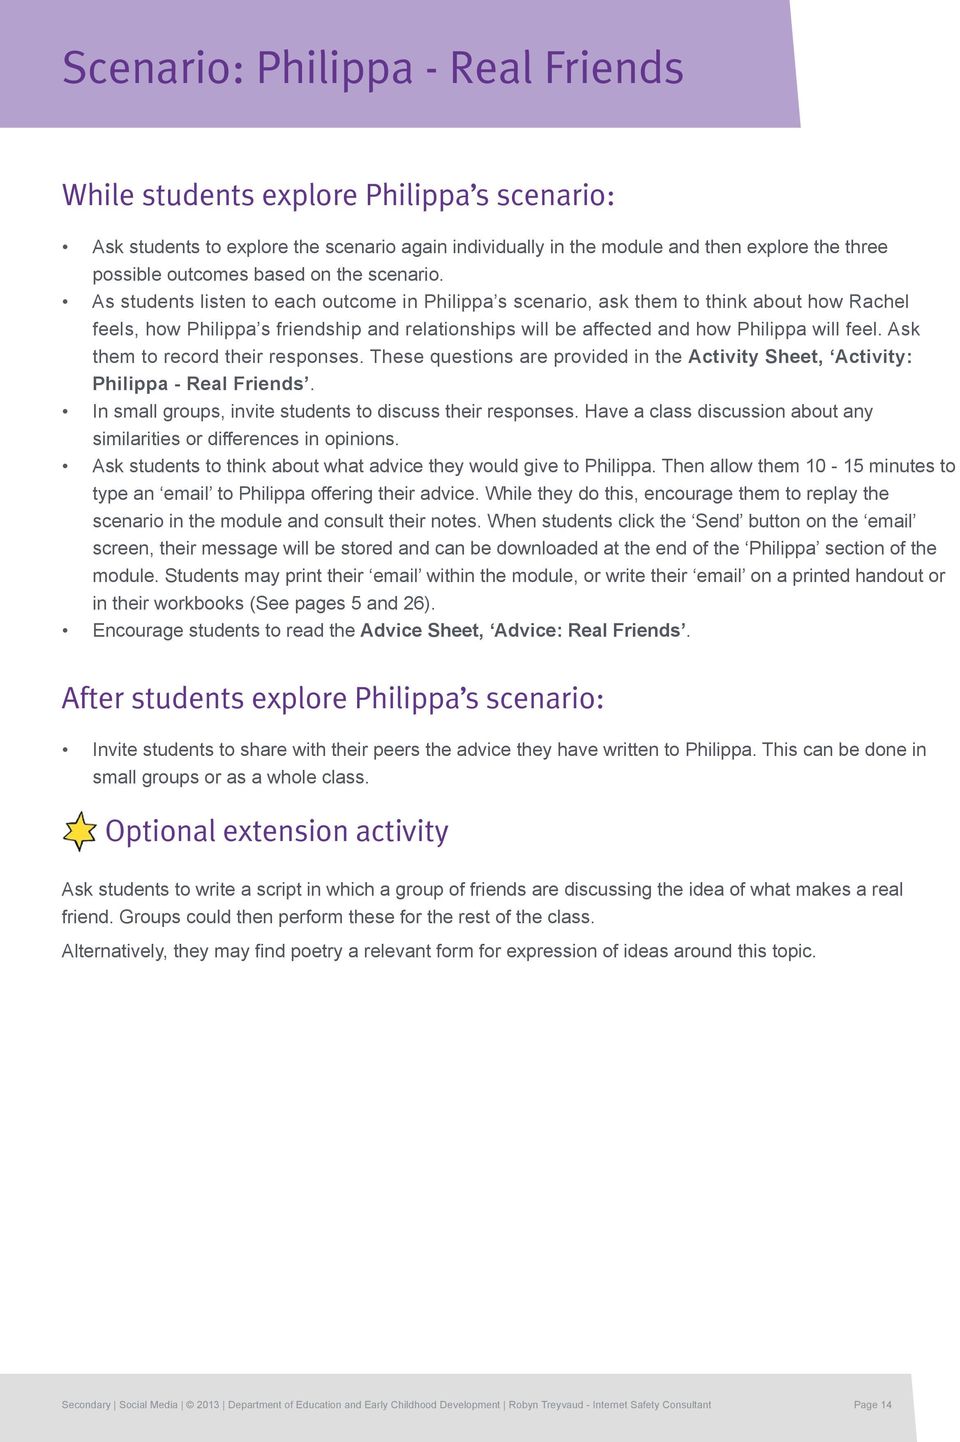 As students listen to each outcome in Philippa s scenario, ask them to think about how Rachel feels, how Philippa s friendship and relationships will be affected and how Philippa will feel.